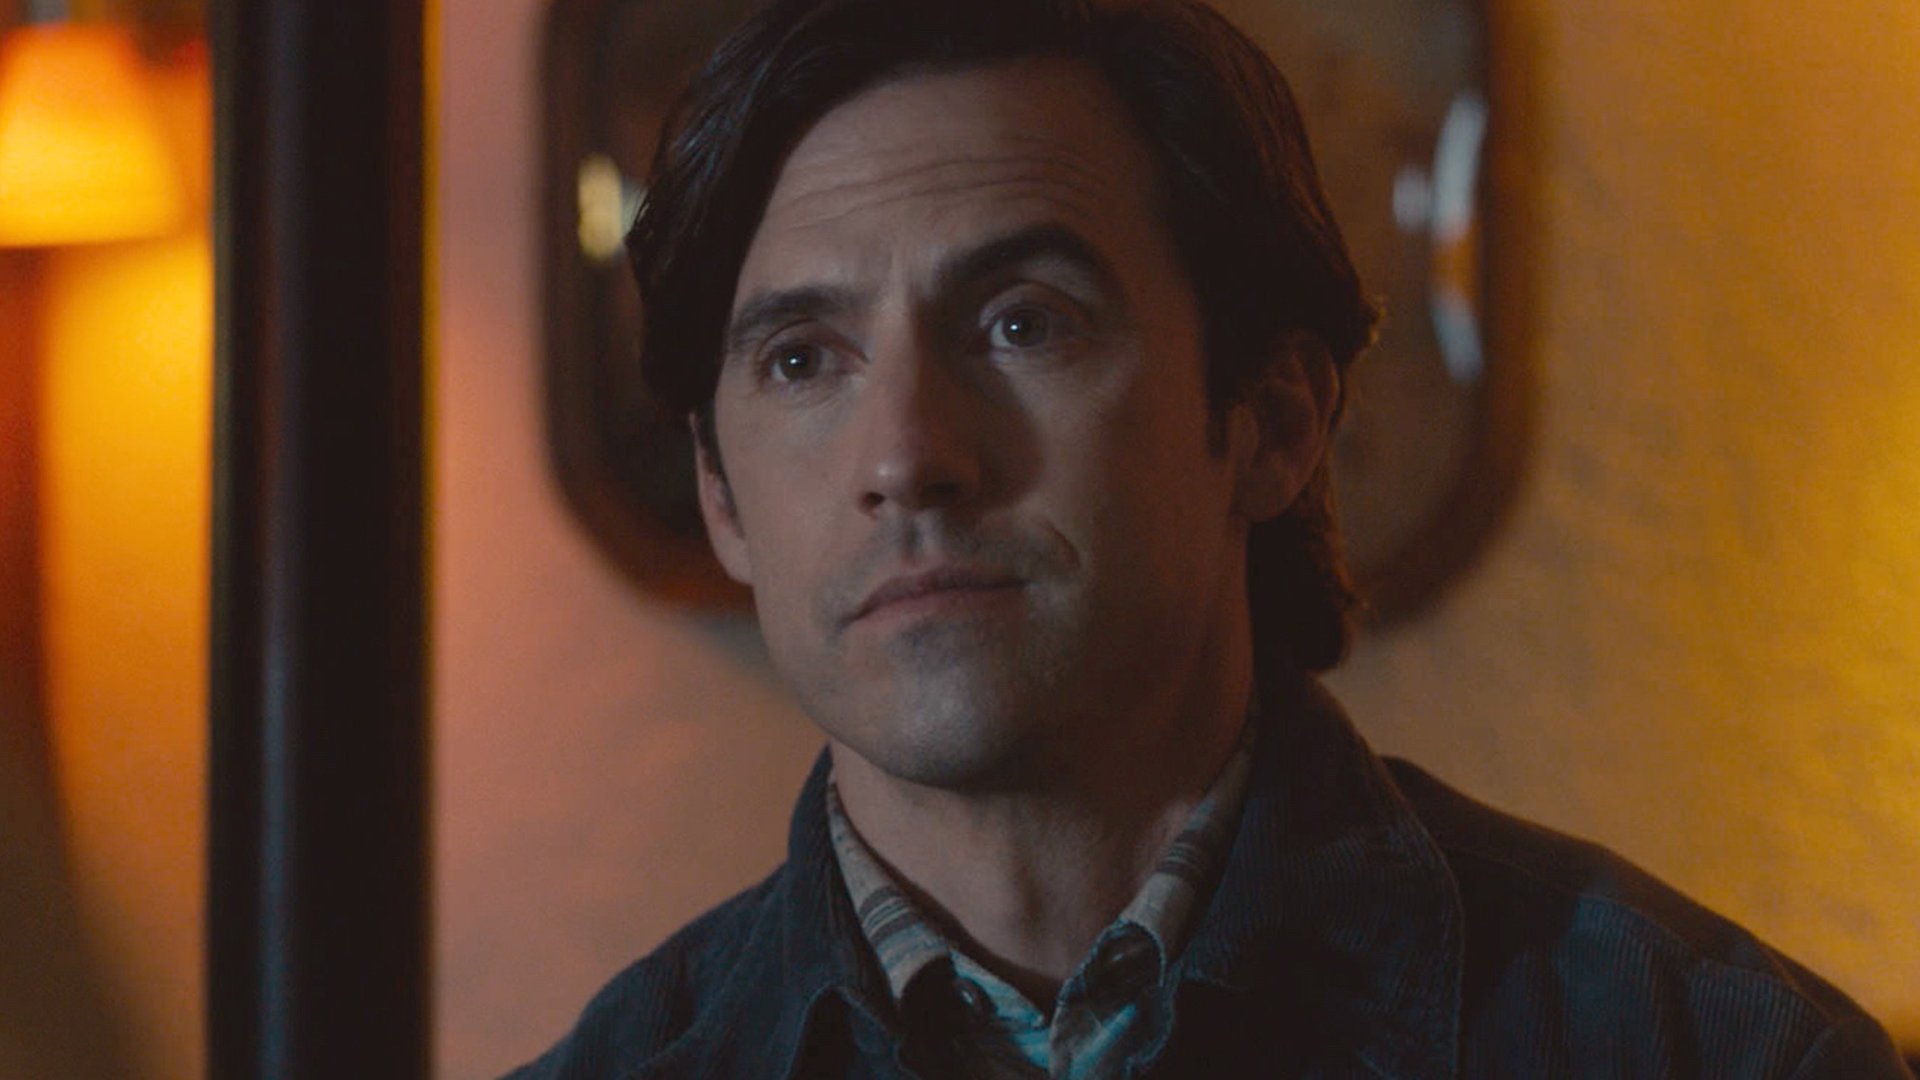 Milo Ventimiglia as Jack Pearson clean shaven in ‘This Is Us’ Season 5 Episode 11, “One Small Step.”